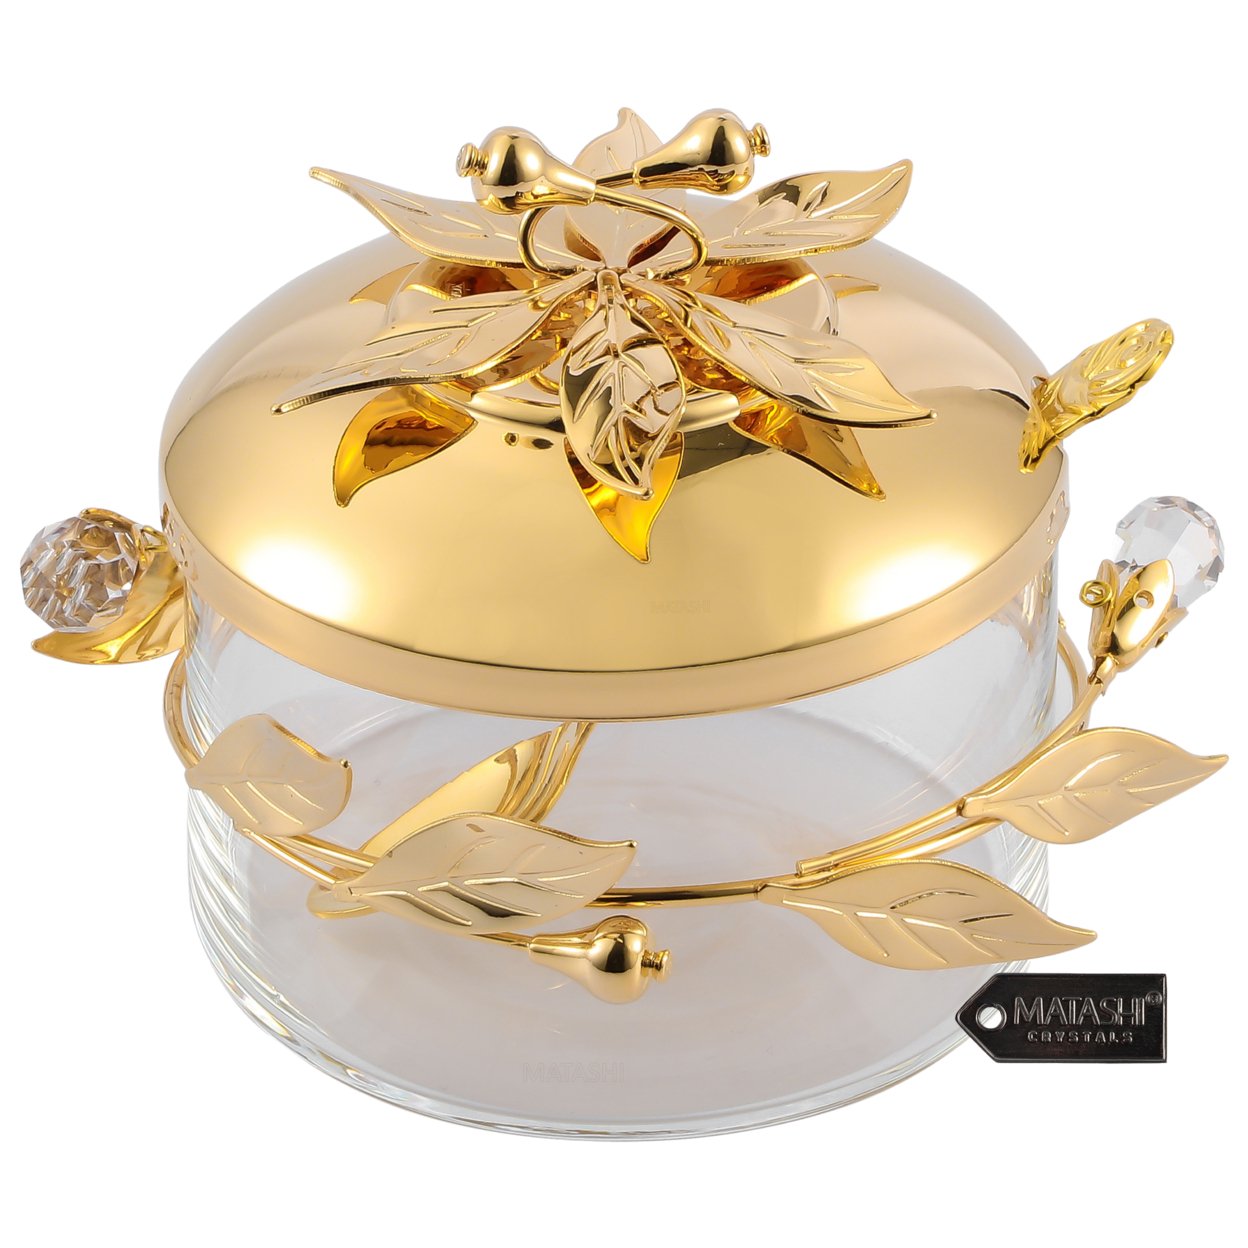 Matashi 24K Gold/SIlver Plated Sugar Bowl Honey Dish Candy Dish Glass Bowl Flower & Vine Design W Spoon Gifts For Mother's Day Christmas - G